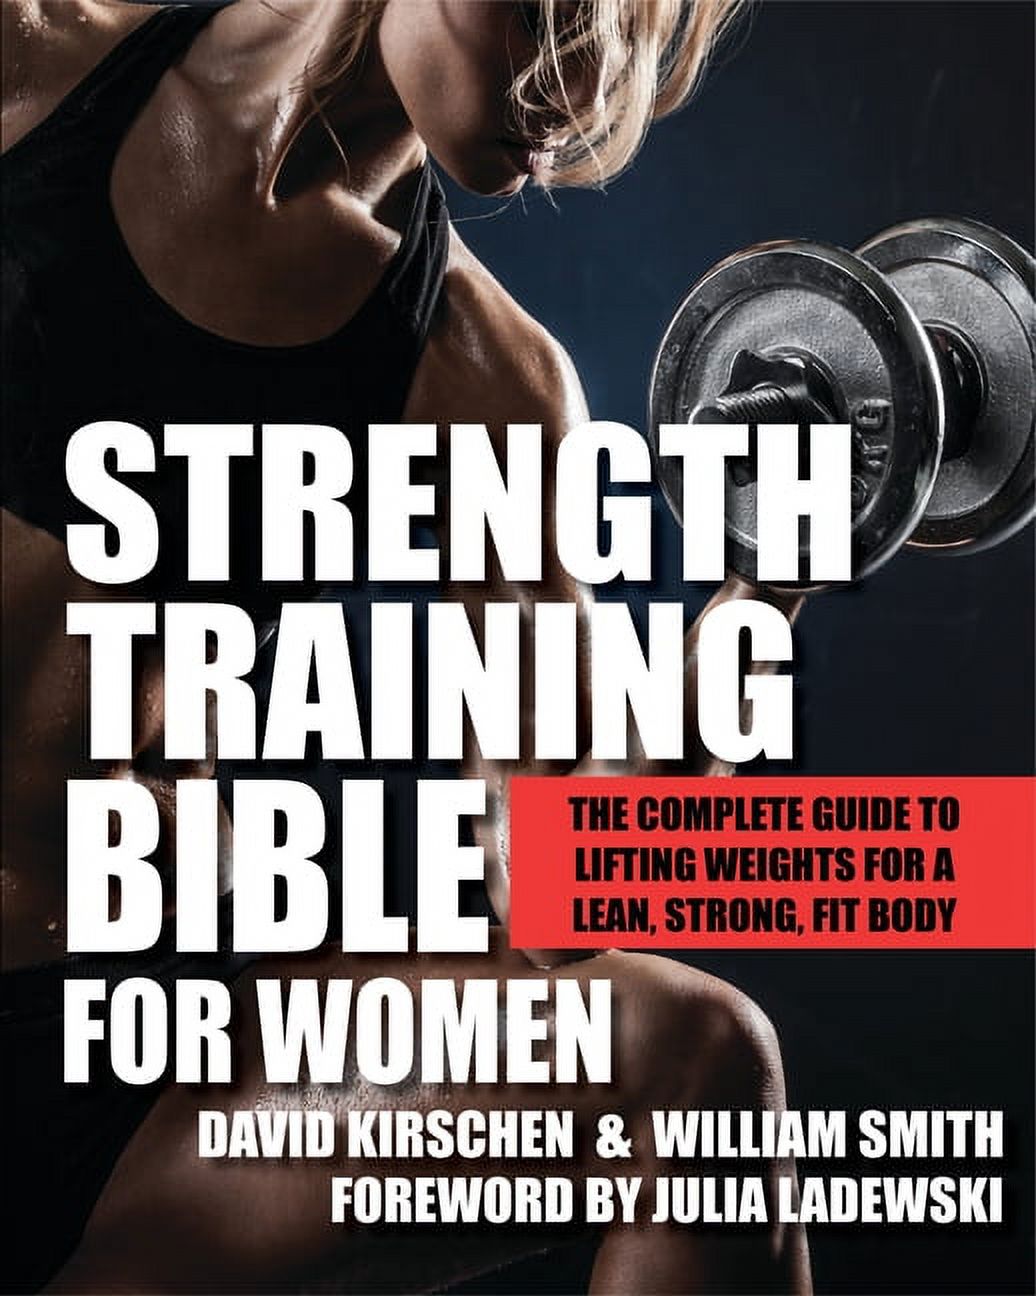 Strength Training Bible for Women : The Complete Guide to Lifting Weights for a Lean, Strong, Fit Body (Paperback) - image 1 of 2